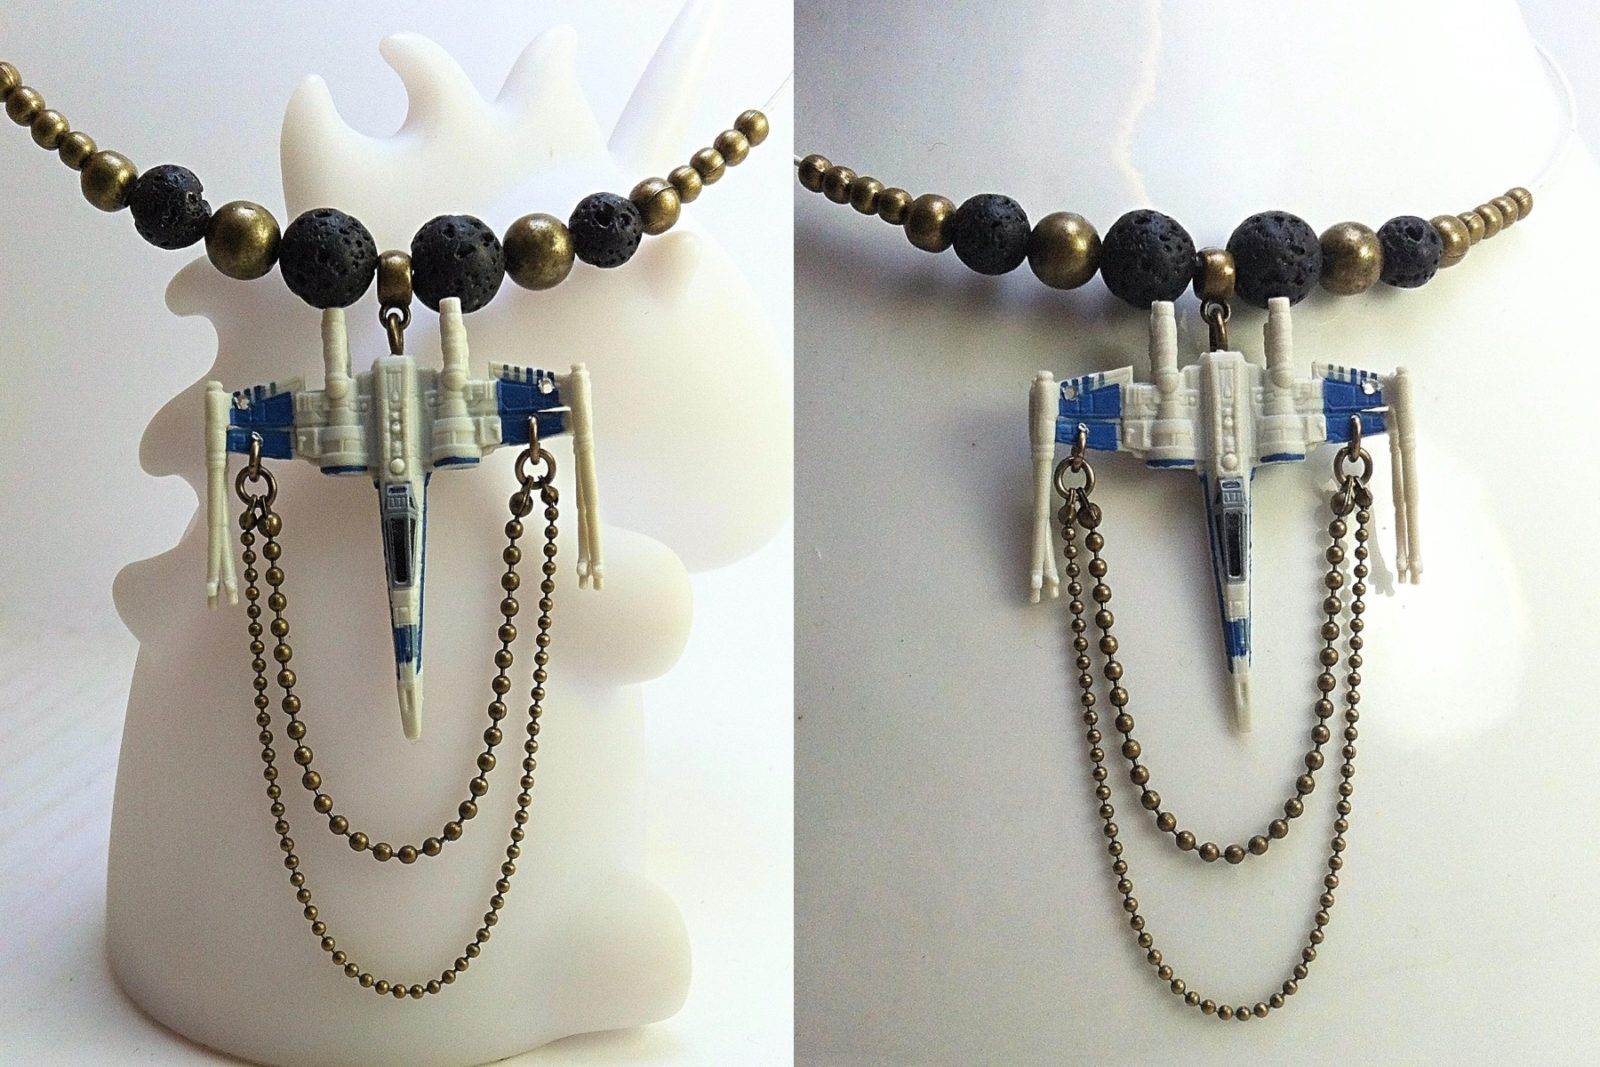 Fan made Star Wars X-Wing Fighter beaded necklace by Etsy seller Bouton d'Or Création